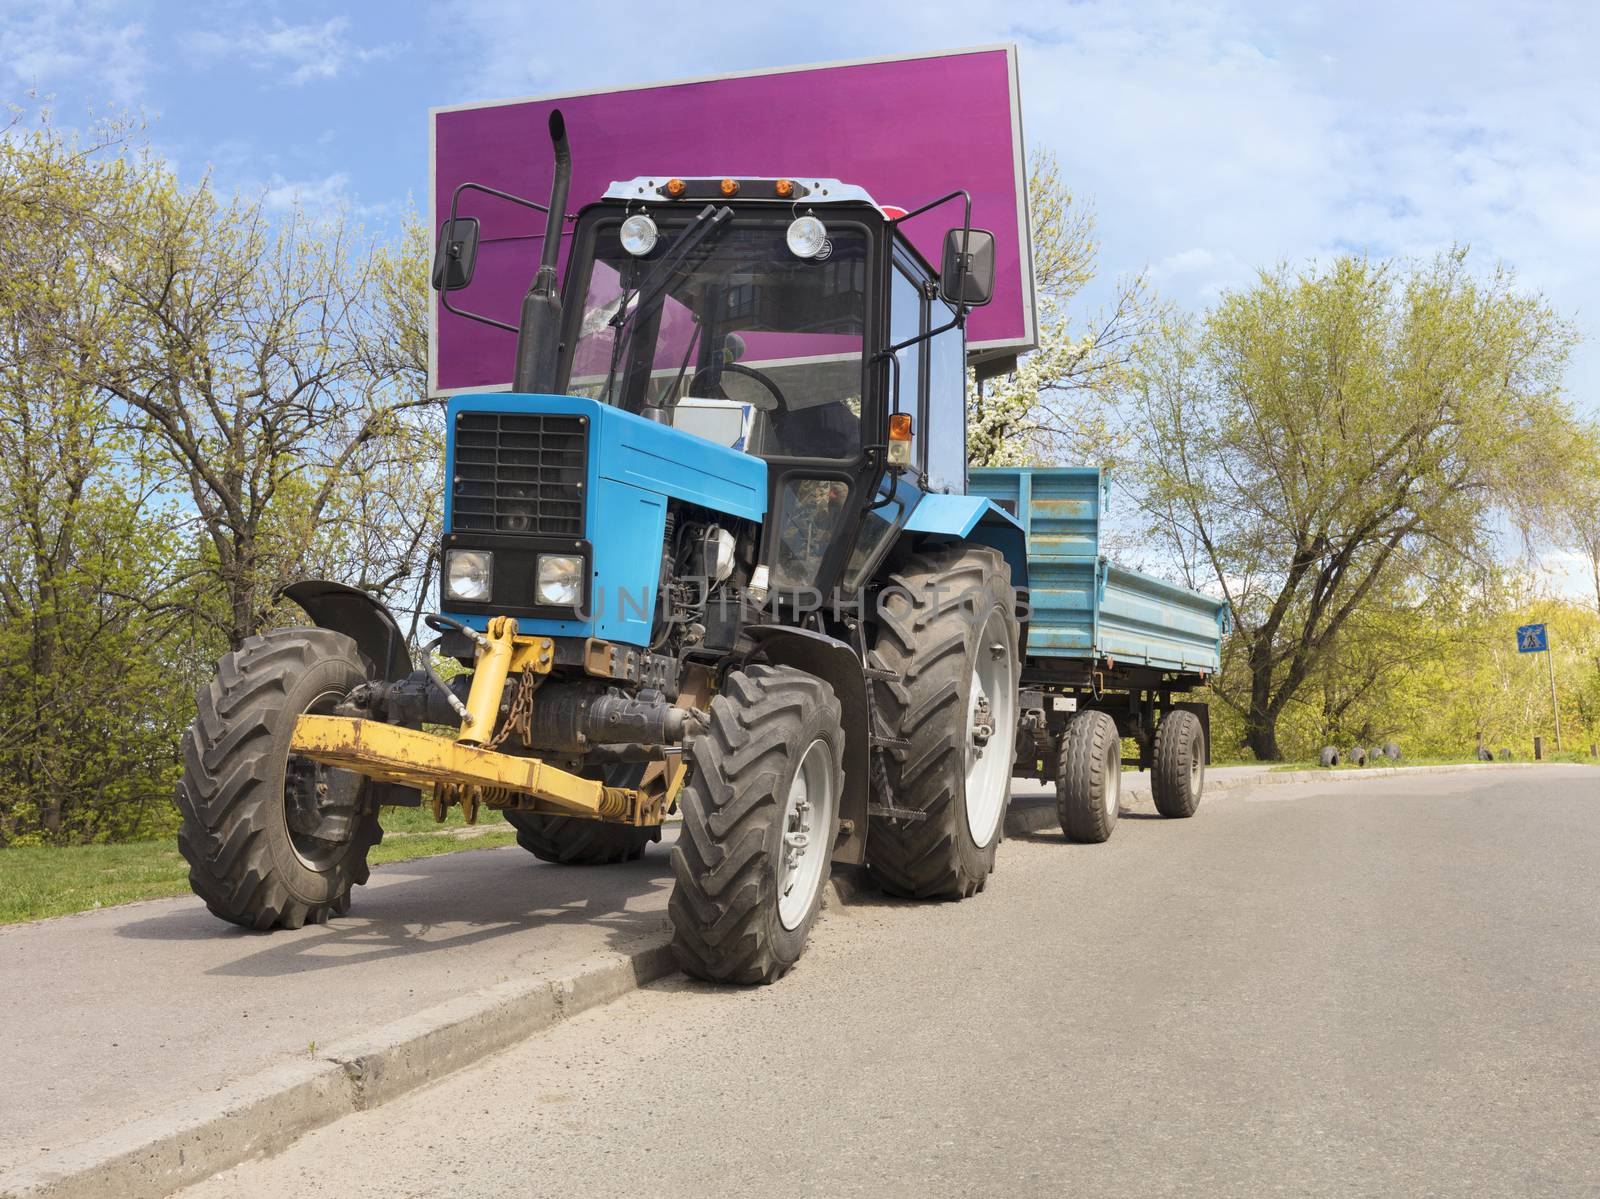 An old small blue tractor with a trailer stands on the side of the road against the background of a green spring park near a large billboard. Place for text.